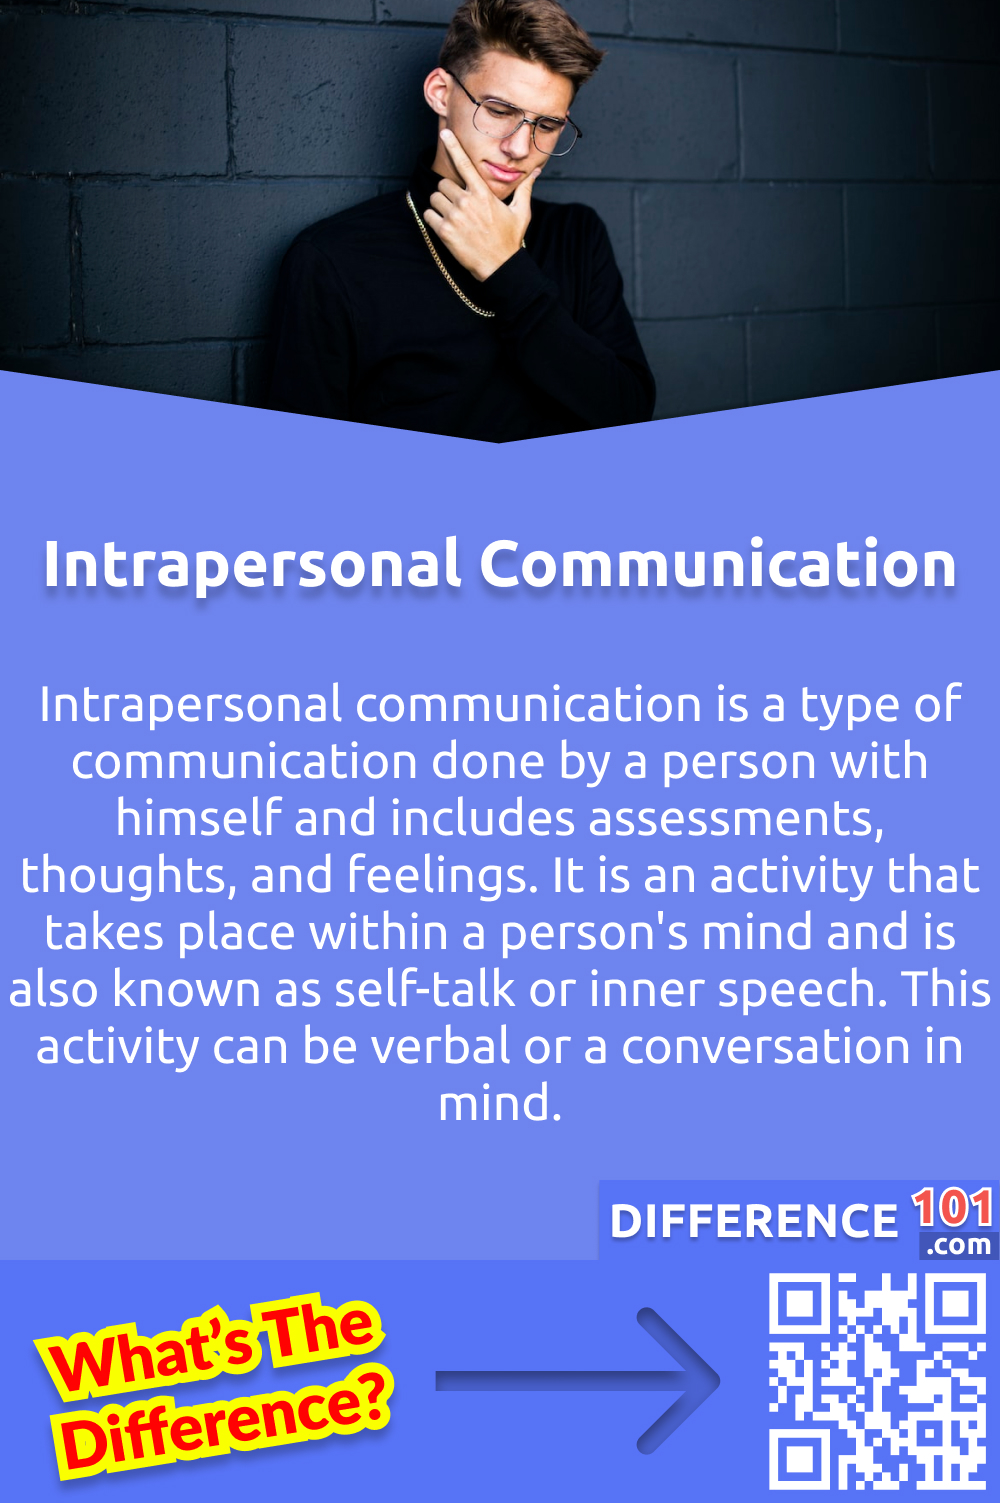 What Is Intrapersonal Communication? Intrapersonal communication is a type of communication done by a person with himself and includes assessments, thoughts, and feelings. It is an activity that takes place within a person's mind and is also known as self-talk or inner speech. This activity can be verbal or a conversation in mind.